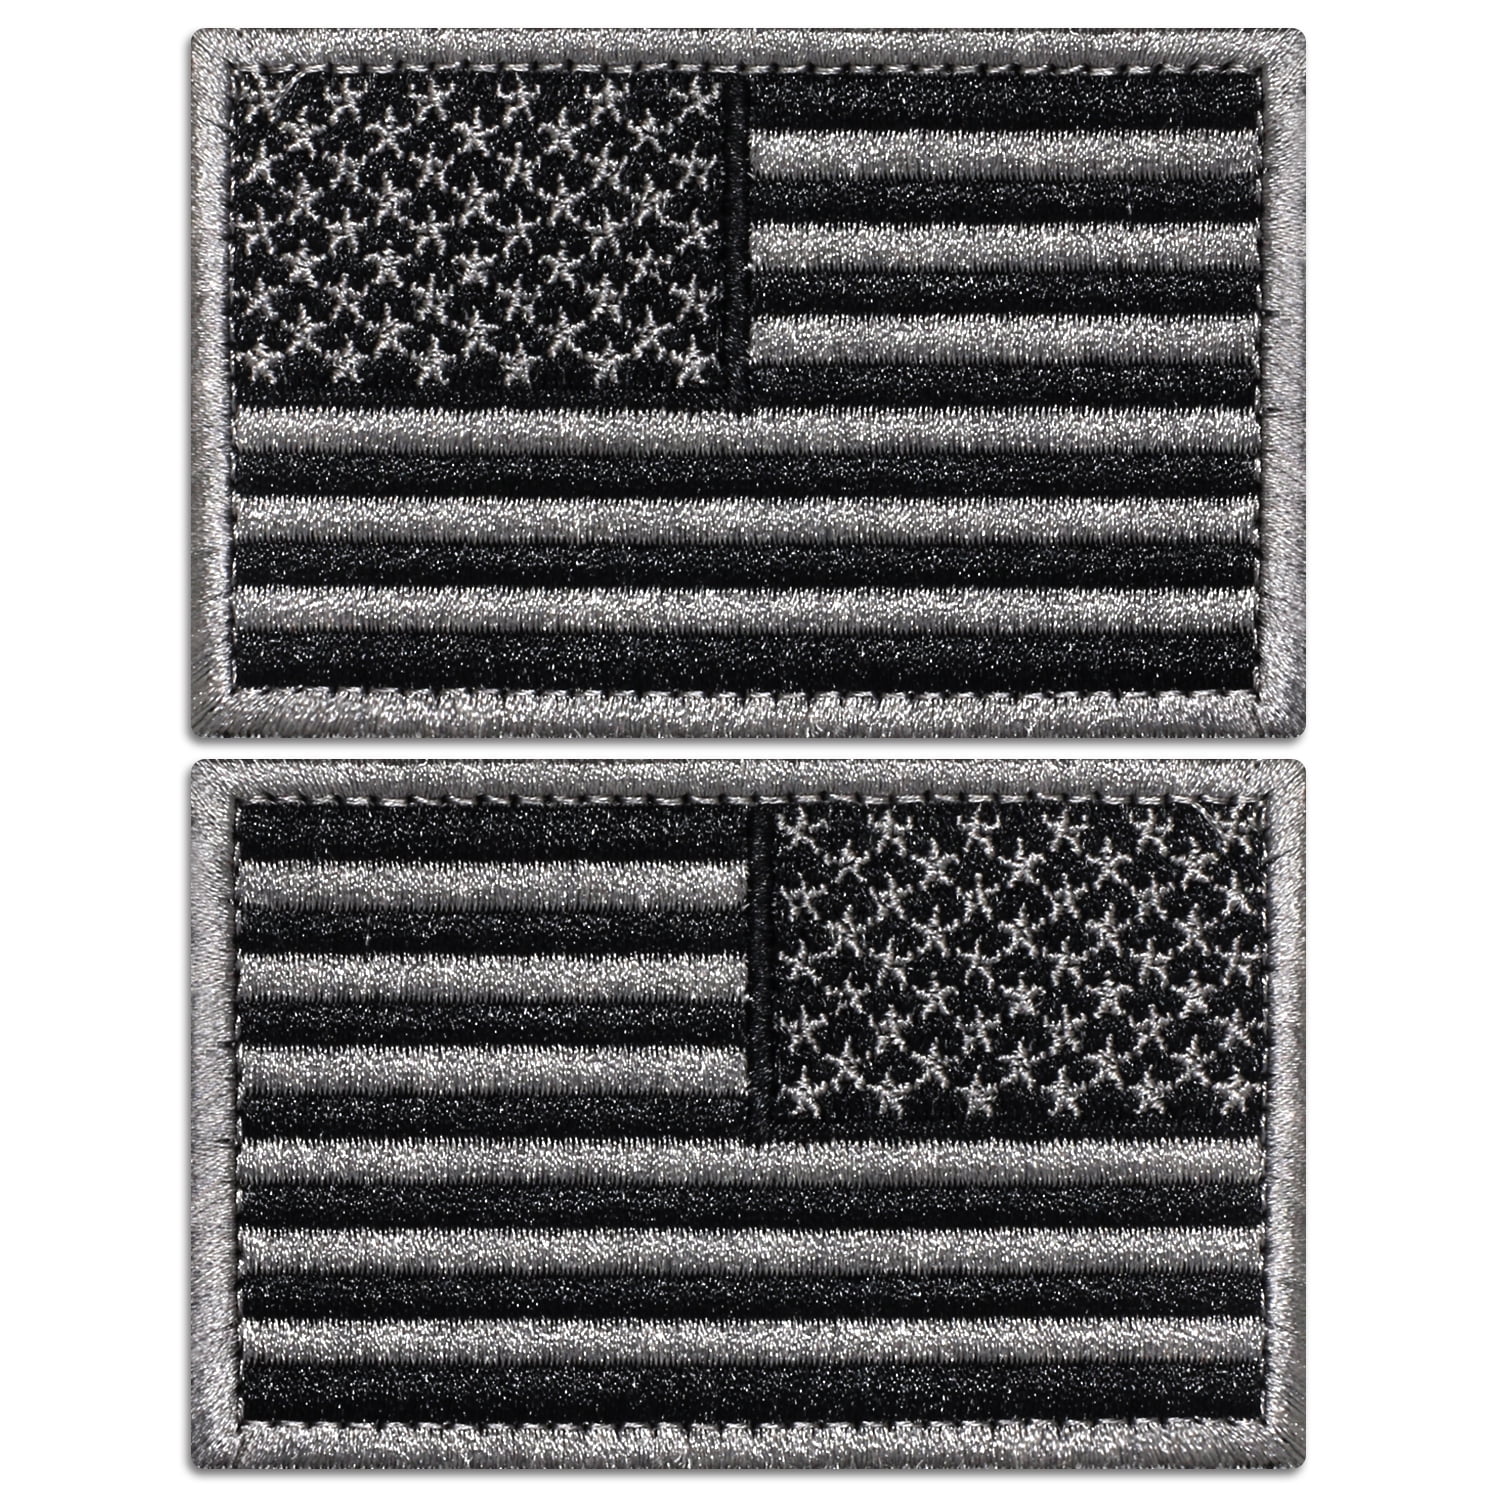 AMERICAN FLAG EMBROIDERED PATCH BLACK WHITE USA US w/ VELCRO® Brand Fastener 